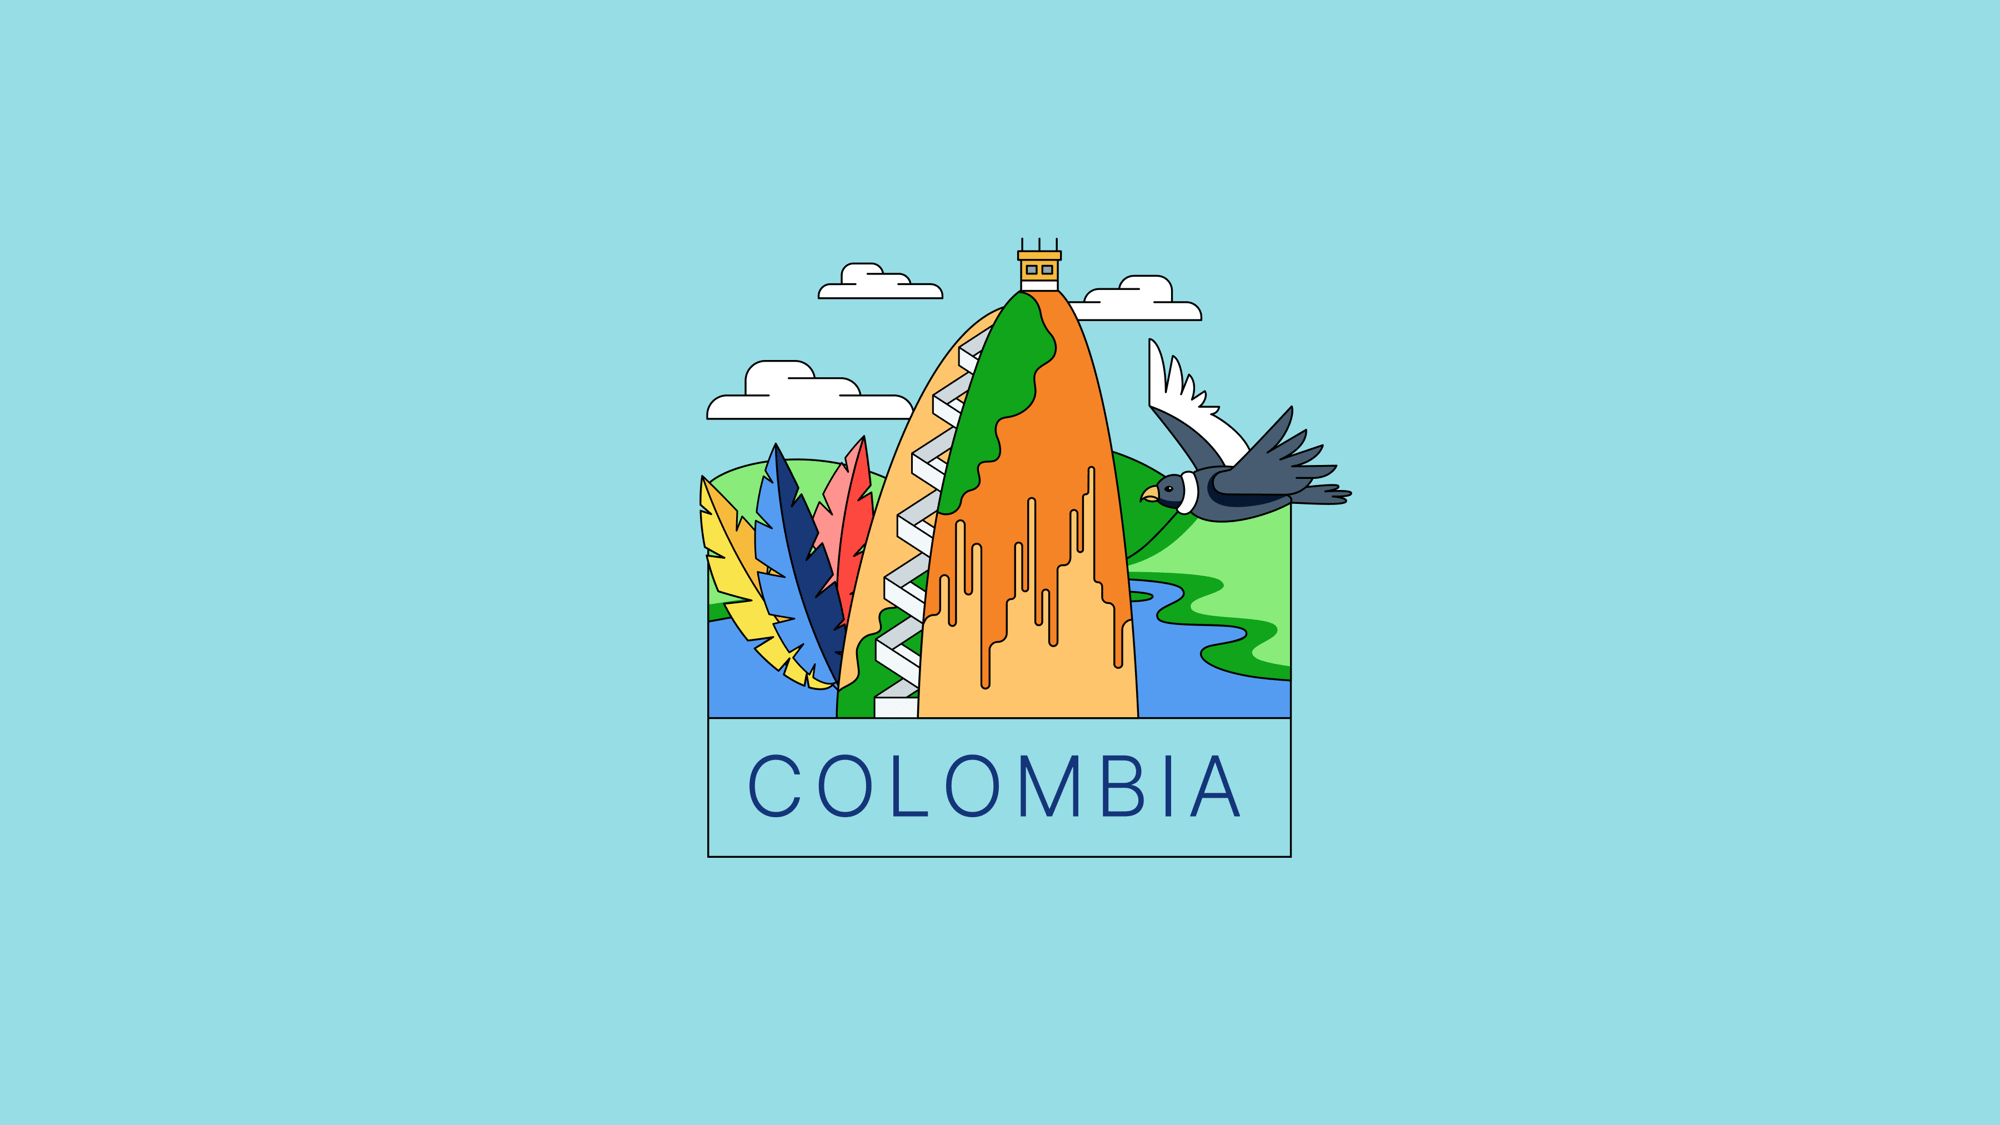 Moving to Colombia, header